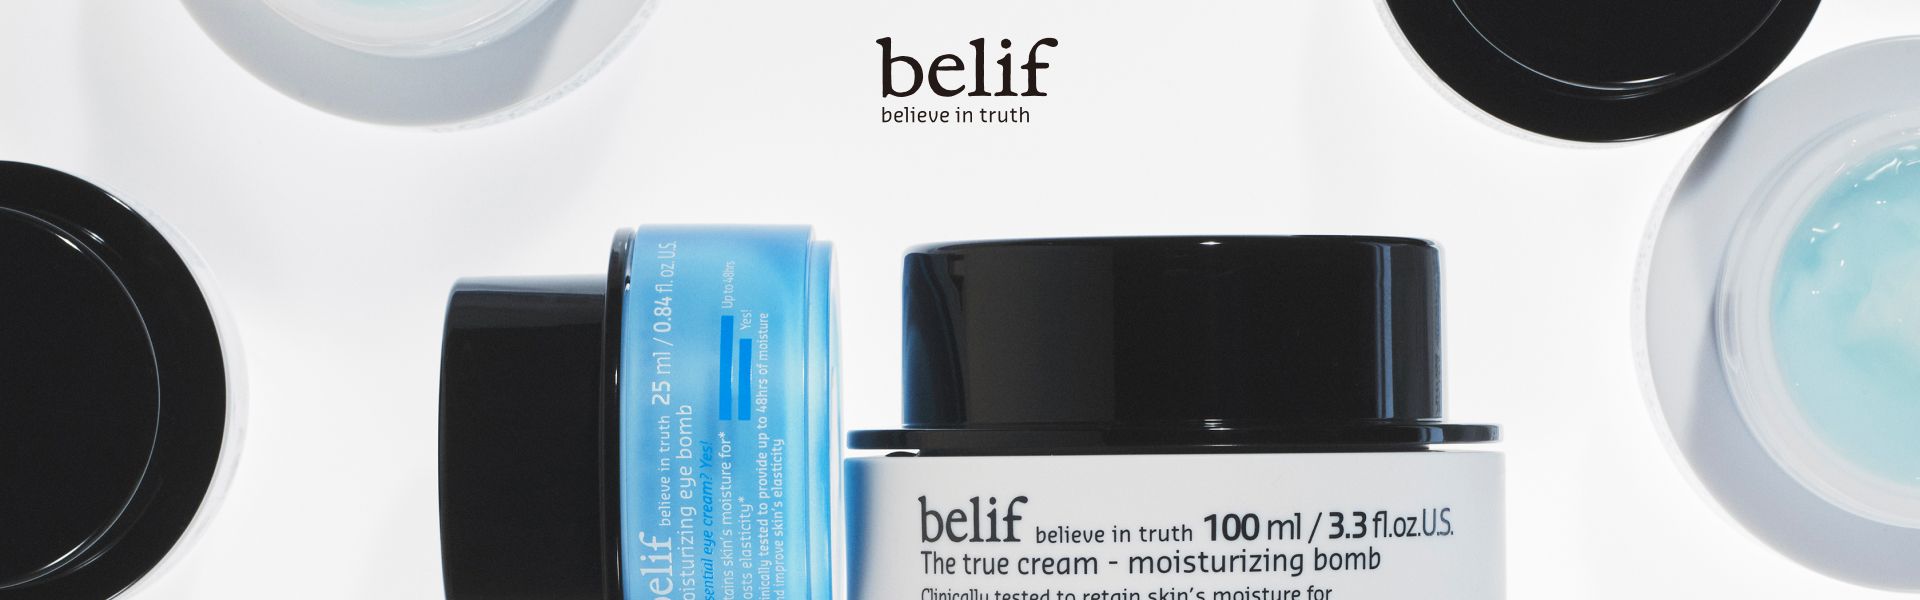 A closeup of belif Aqua Bomb and Moisturizing Bomb products on a white background with the belif logo and tagline.